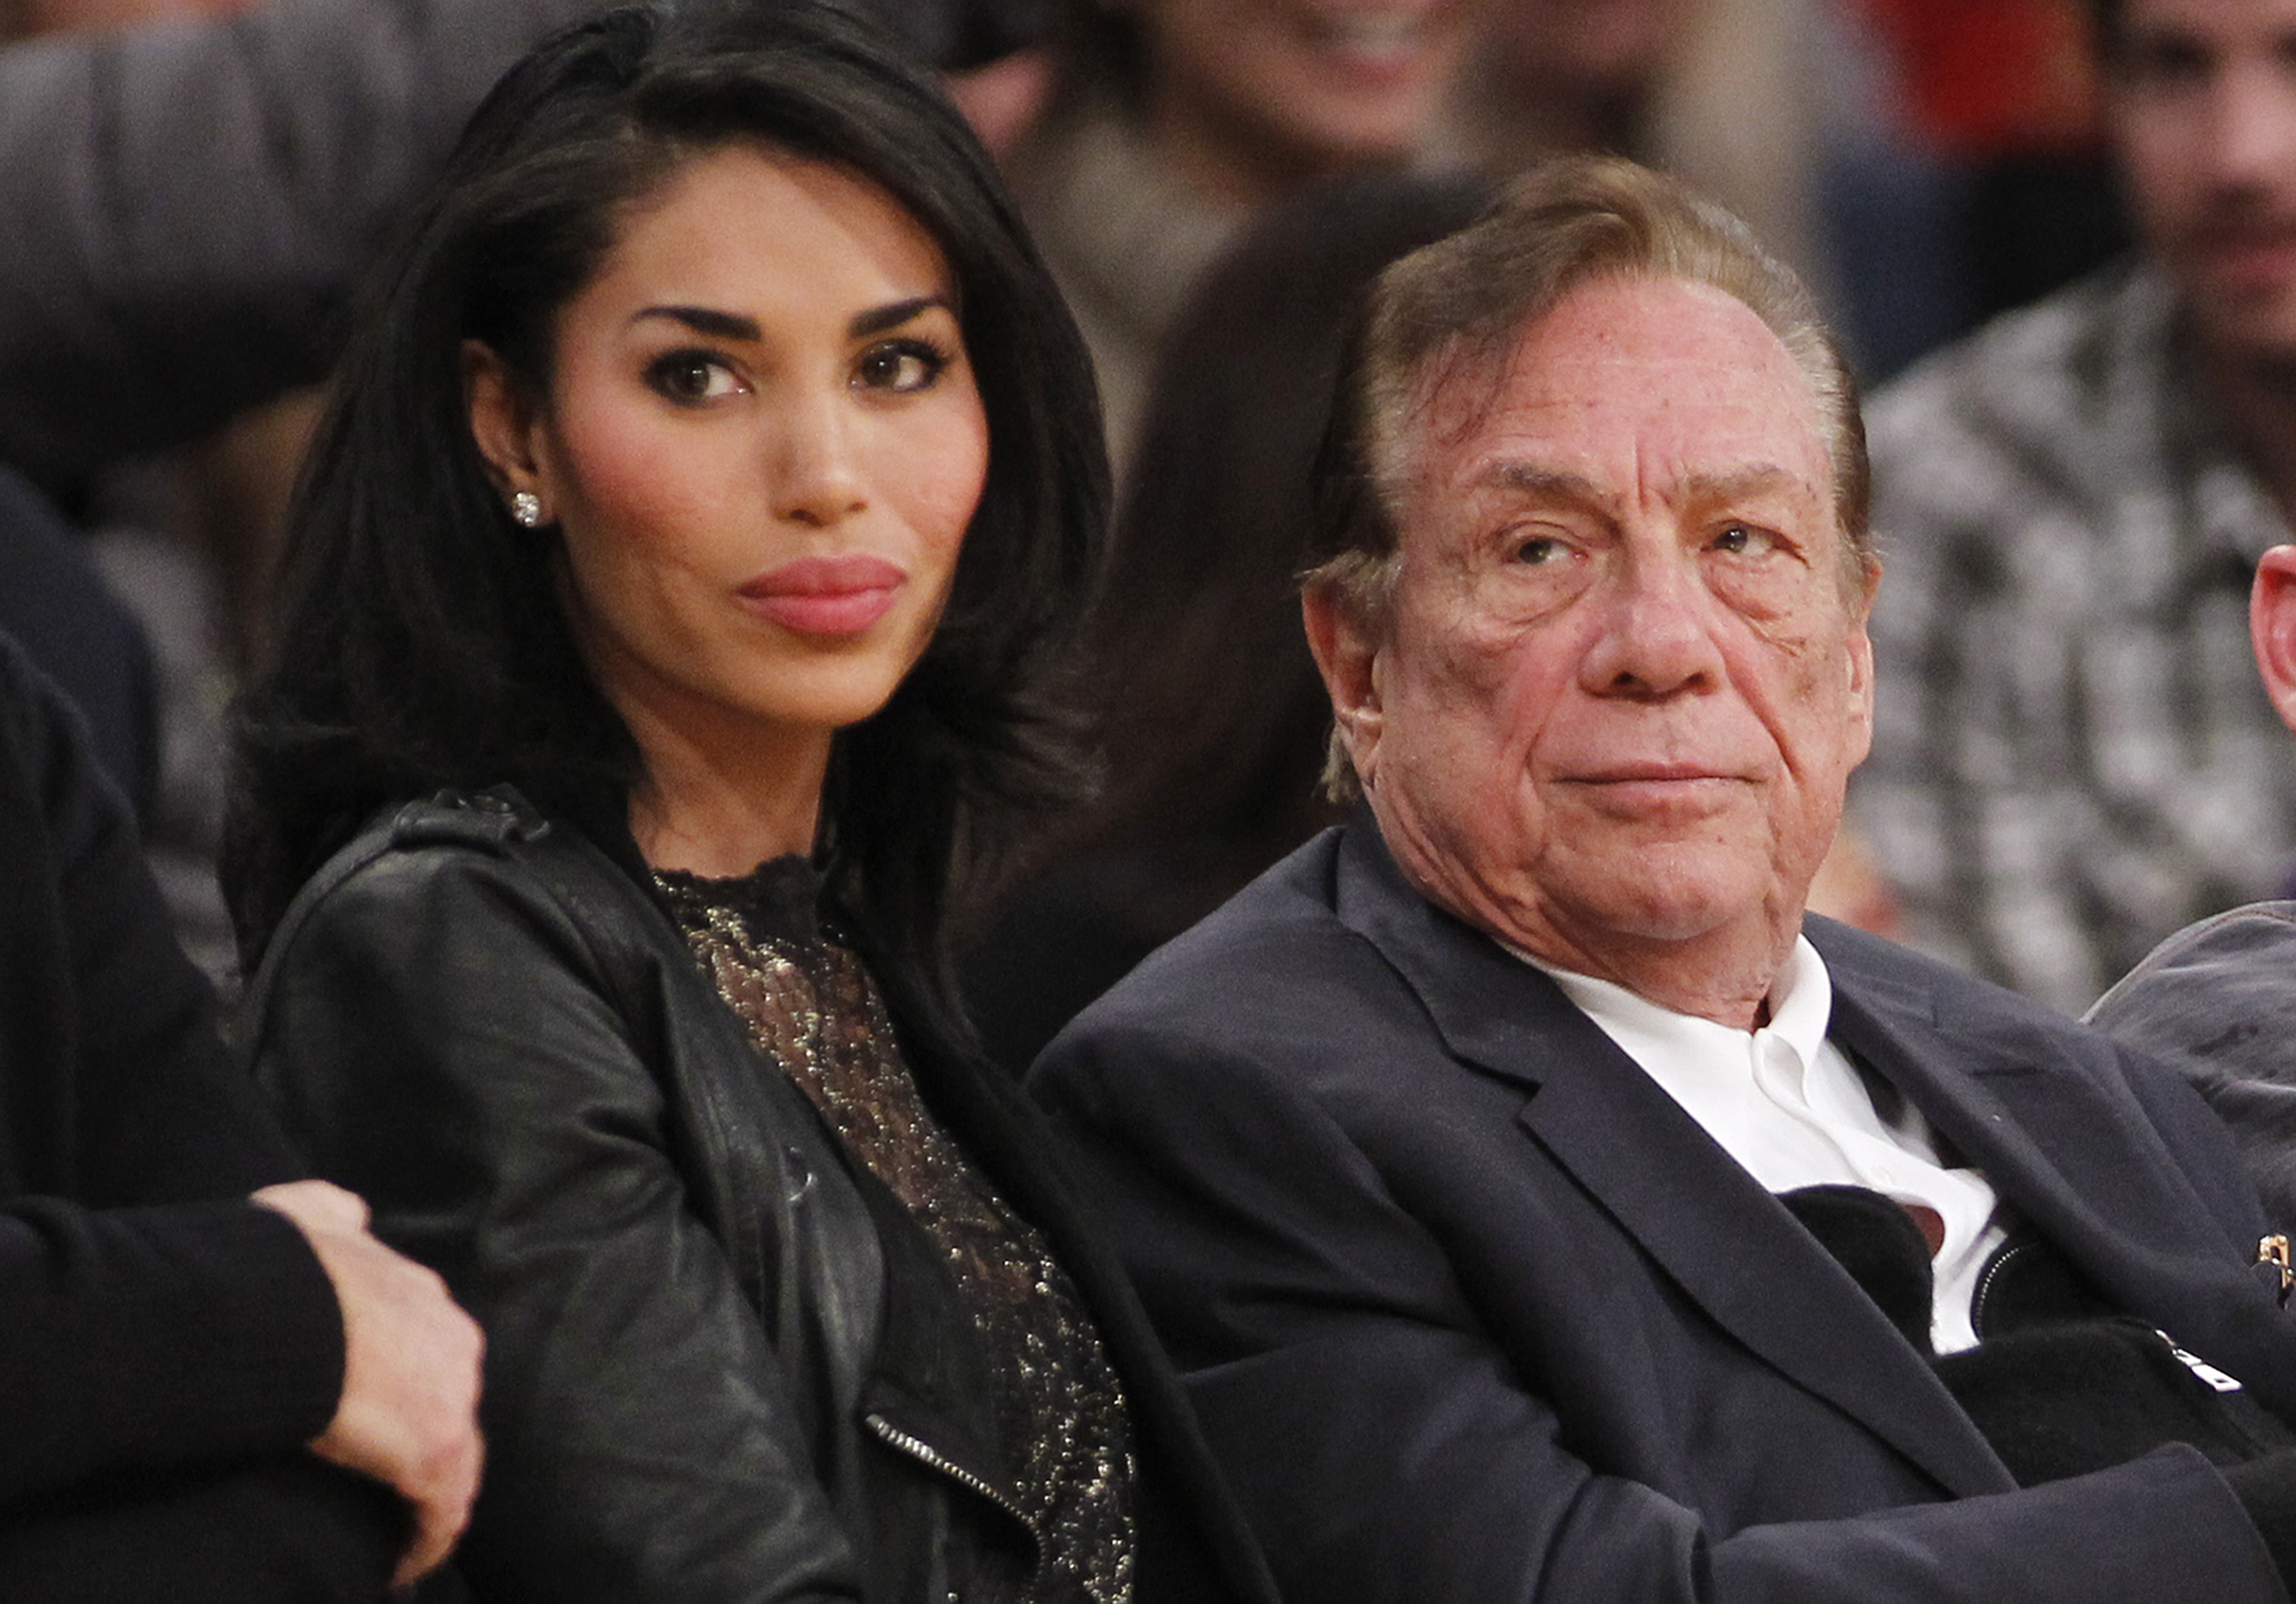 Los Angeles Clippers owner Donald Sterling, right, and V. Stiviano, left, watch the Clippers play the Los Angeles Lakers during an NBA preseason basketball game in Los Angeles on Monday, Dec. 19, 2011. (Danny Moloshok—AP)